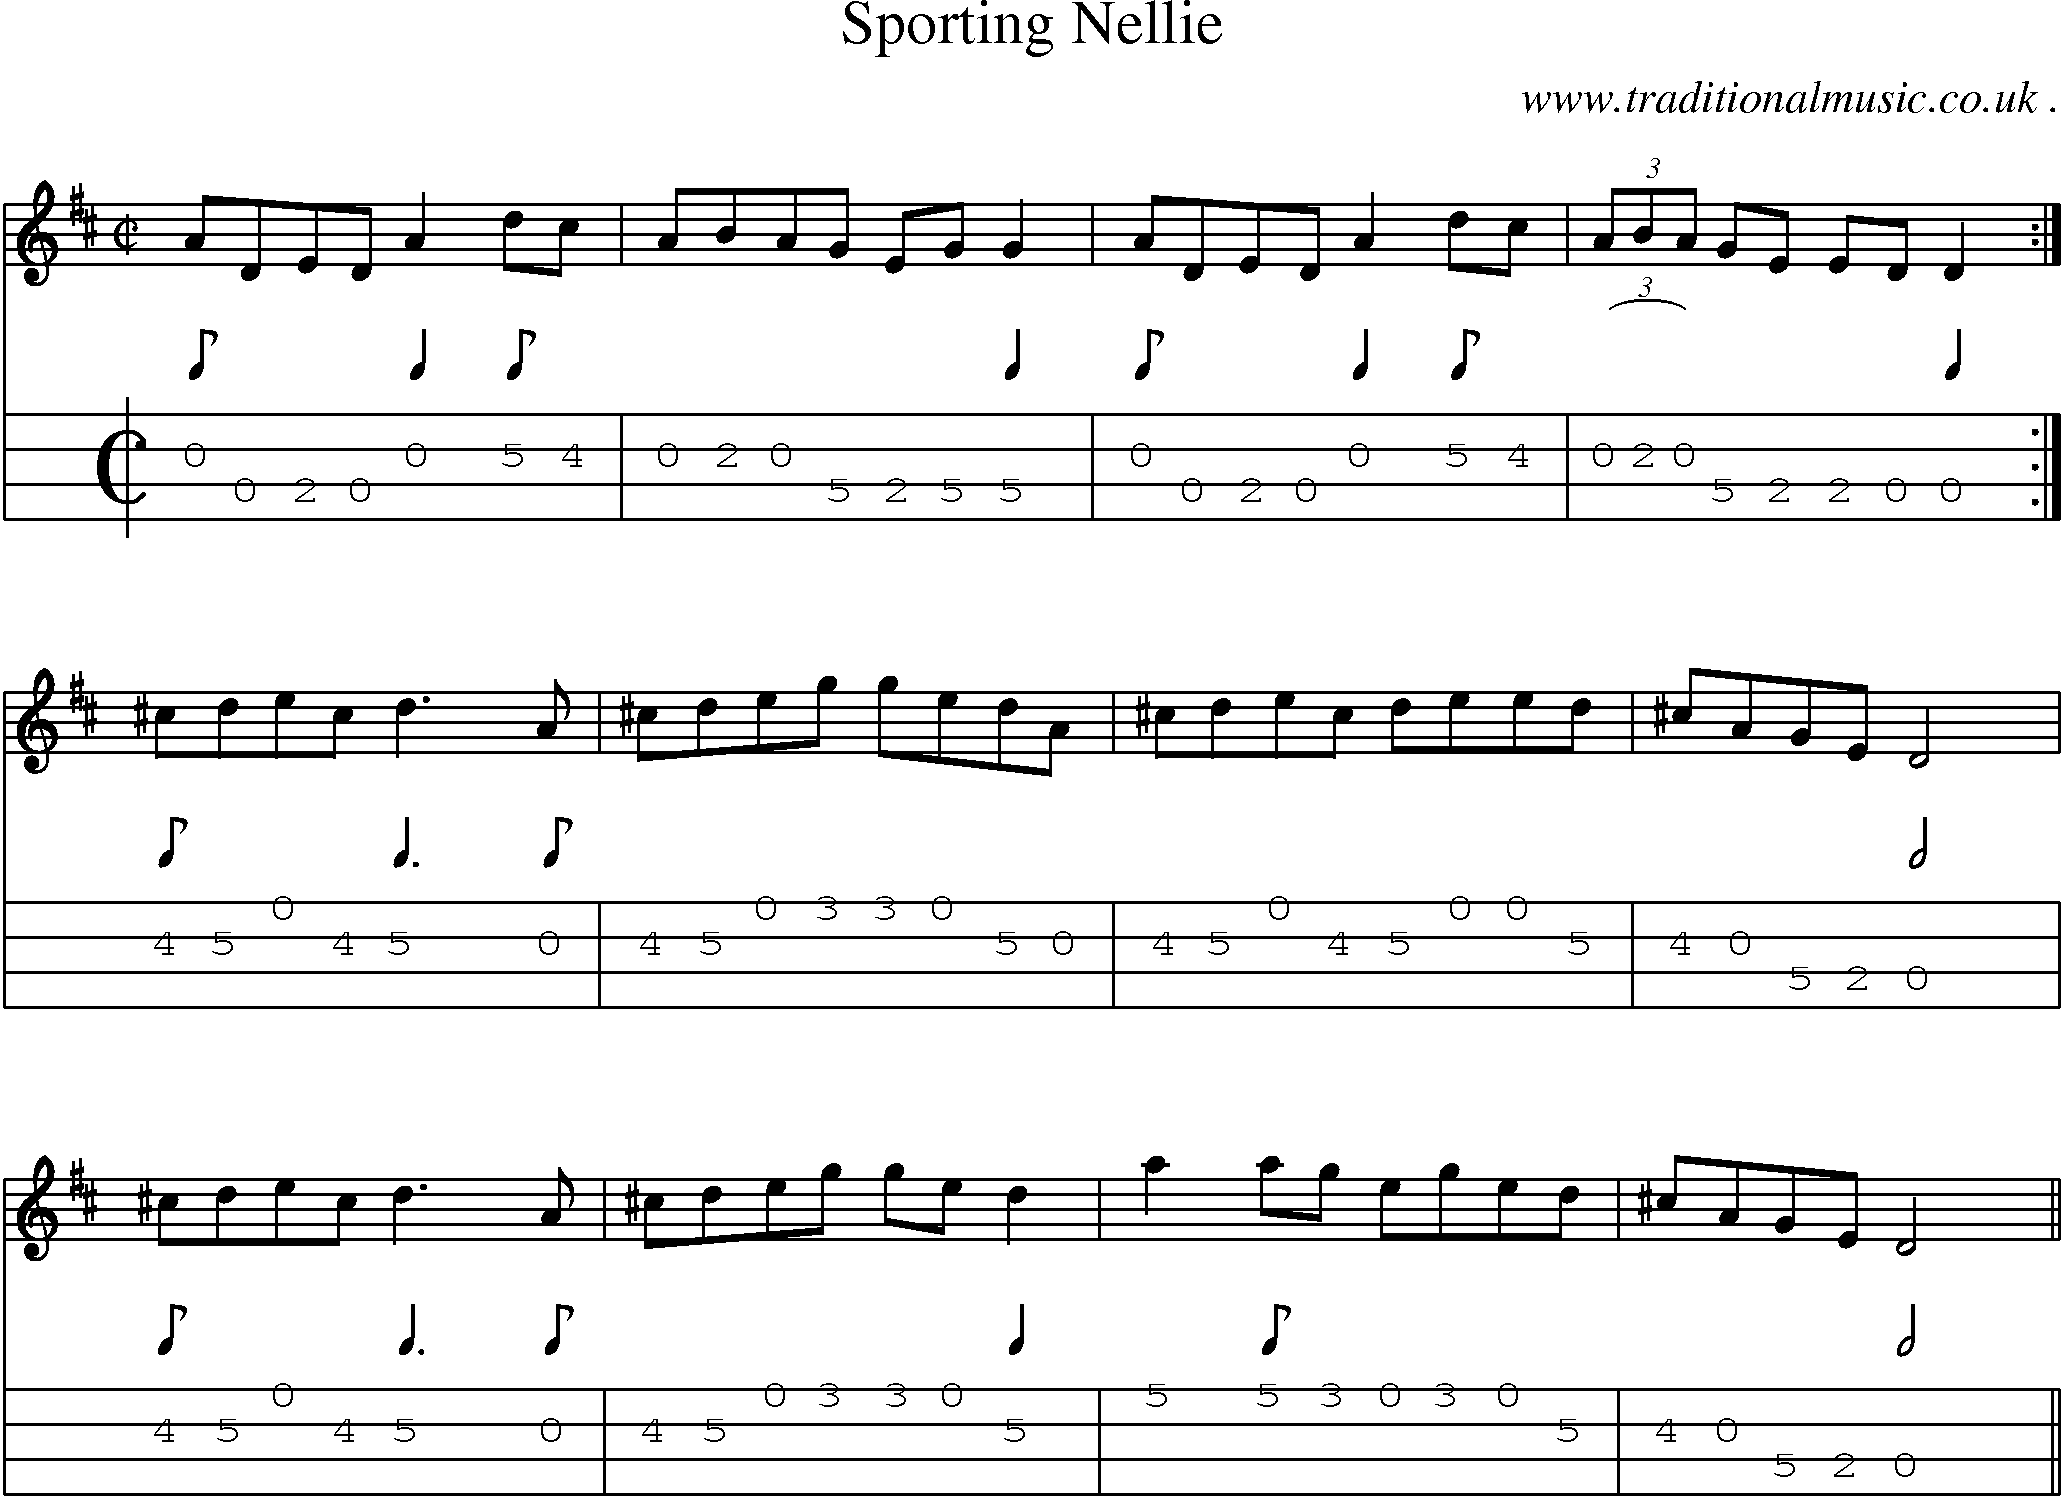 Sheet-Music and Mandolin Tabs for Sporting Nellie